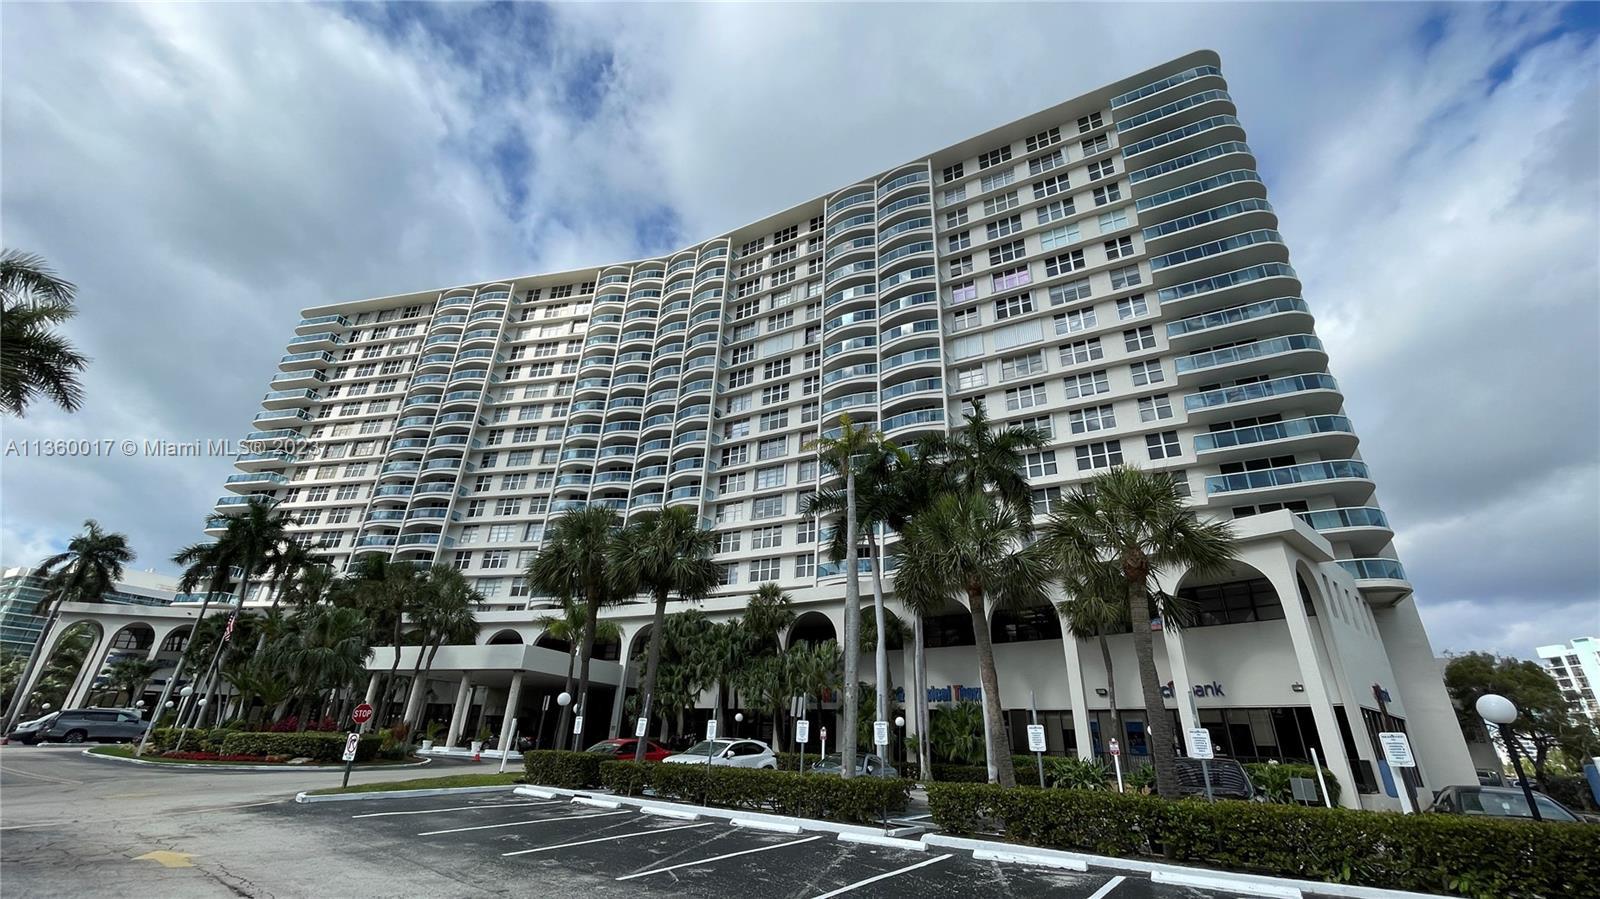 1/2 Condo Unit located on the 12th Floor featuring Open Balcony, Intracoastal/Skyline Views, separat